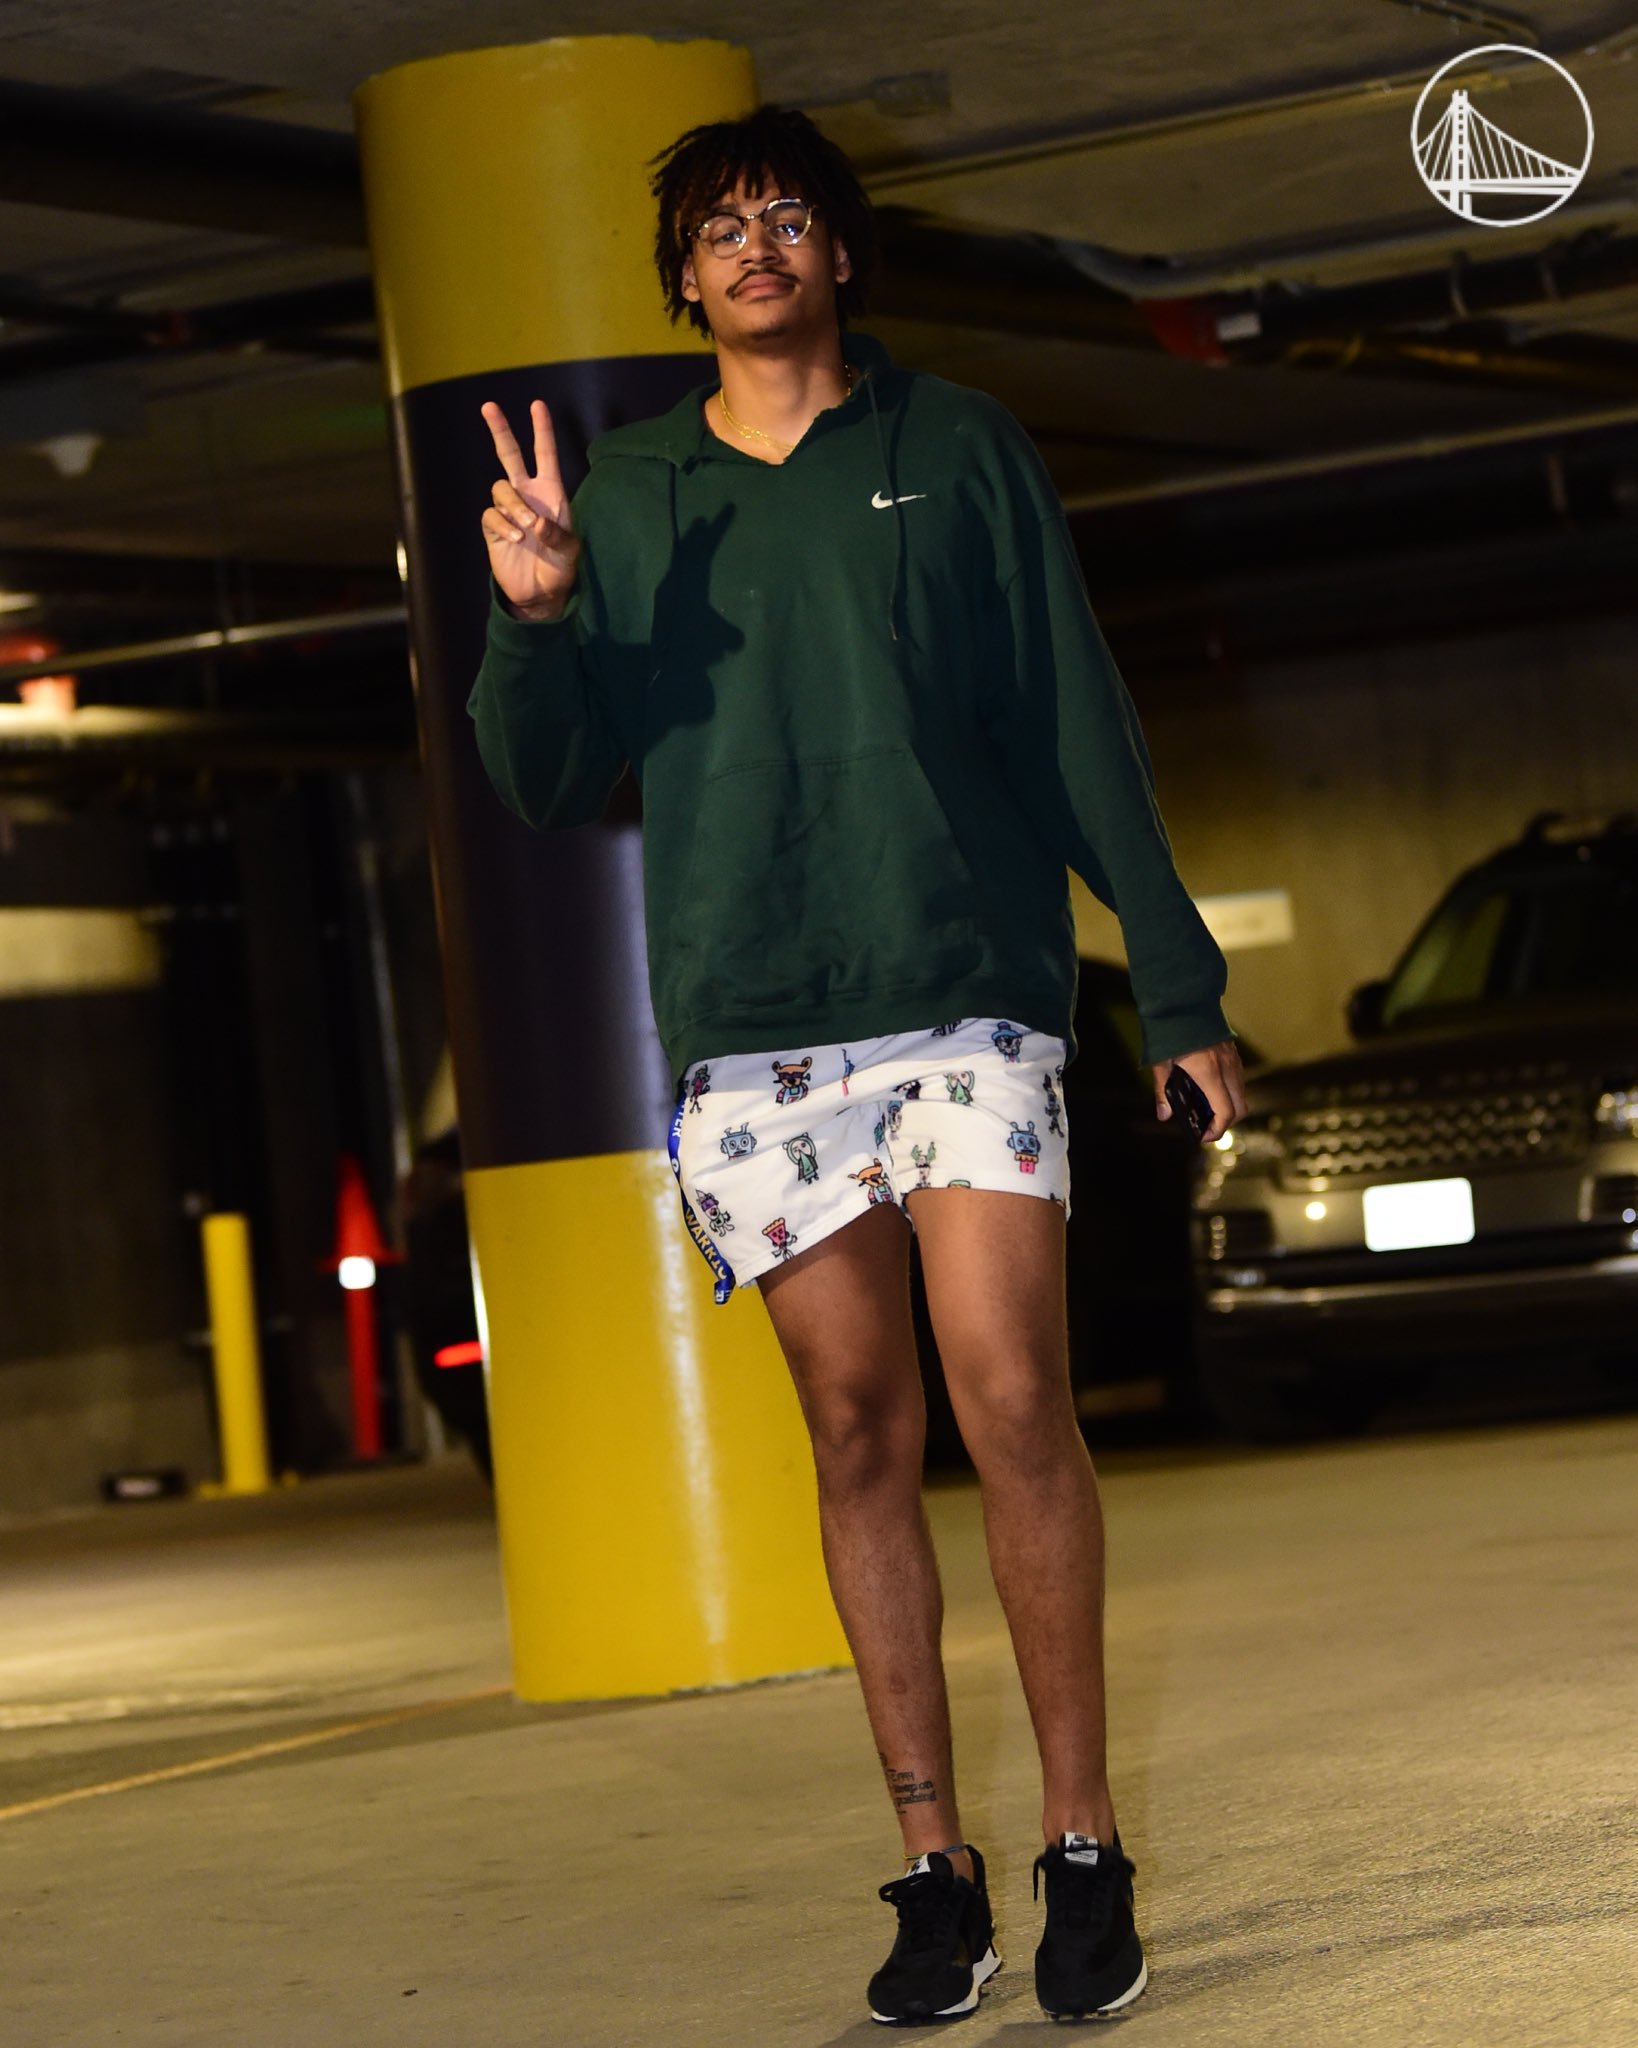 mad woman szn 🔮🏄🏻‍♀️✨ on X: I gotta say I love the commitment jordan  poole has on thighs and long legs representation in the nba it's sadly  lacking  / X